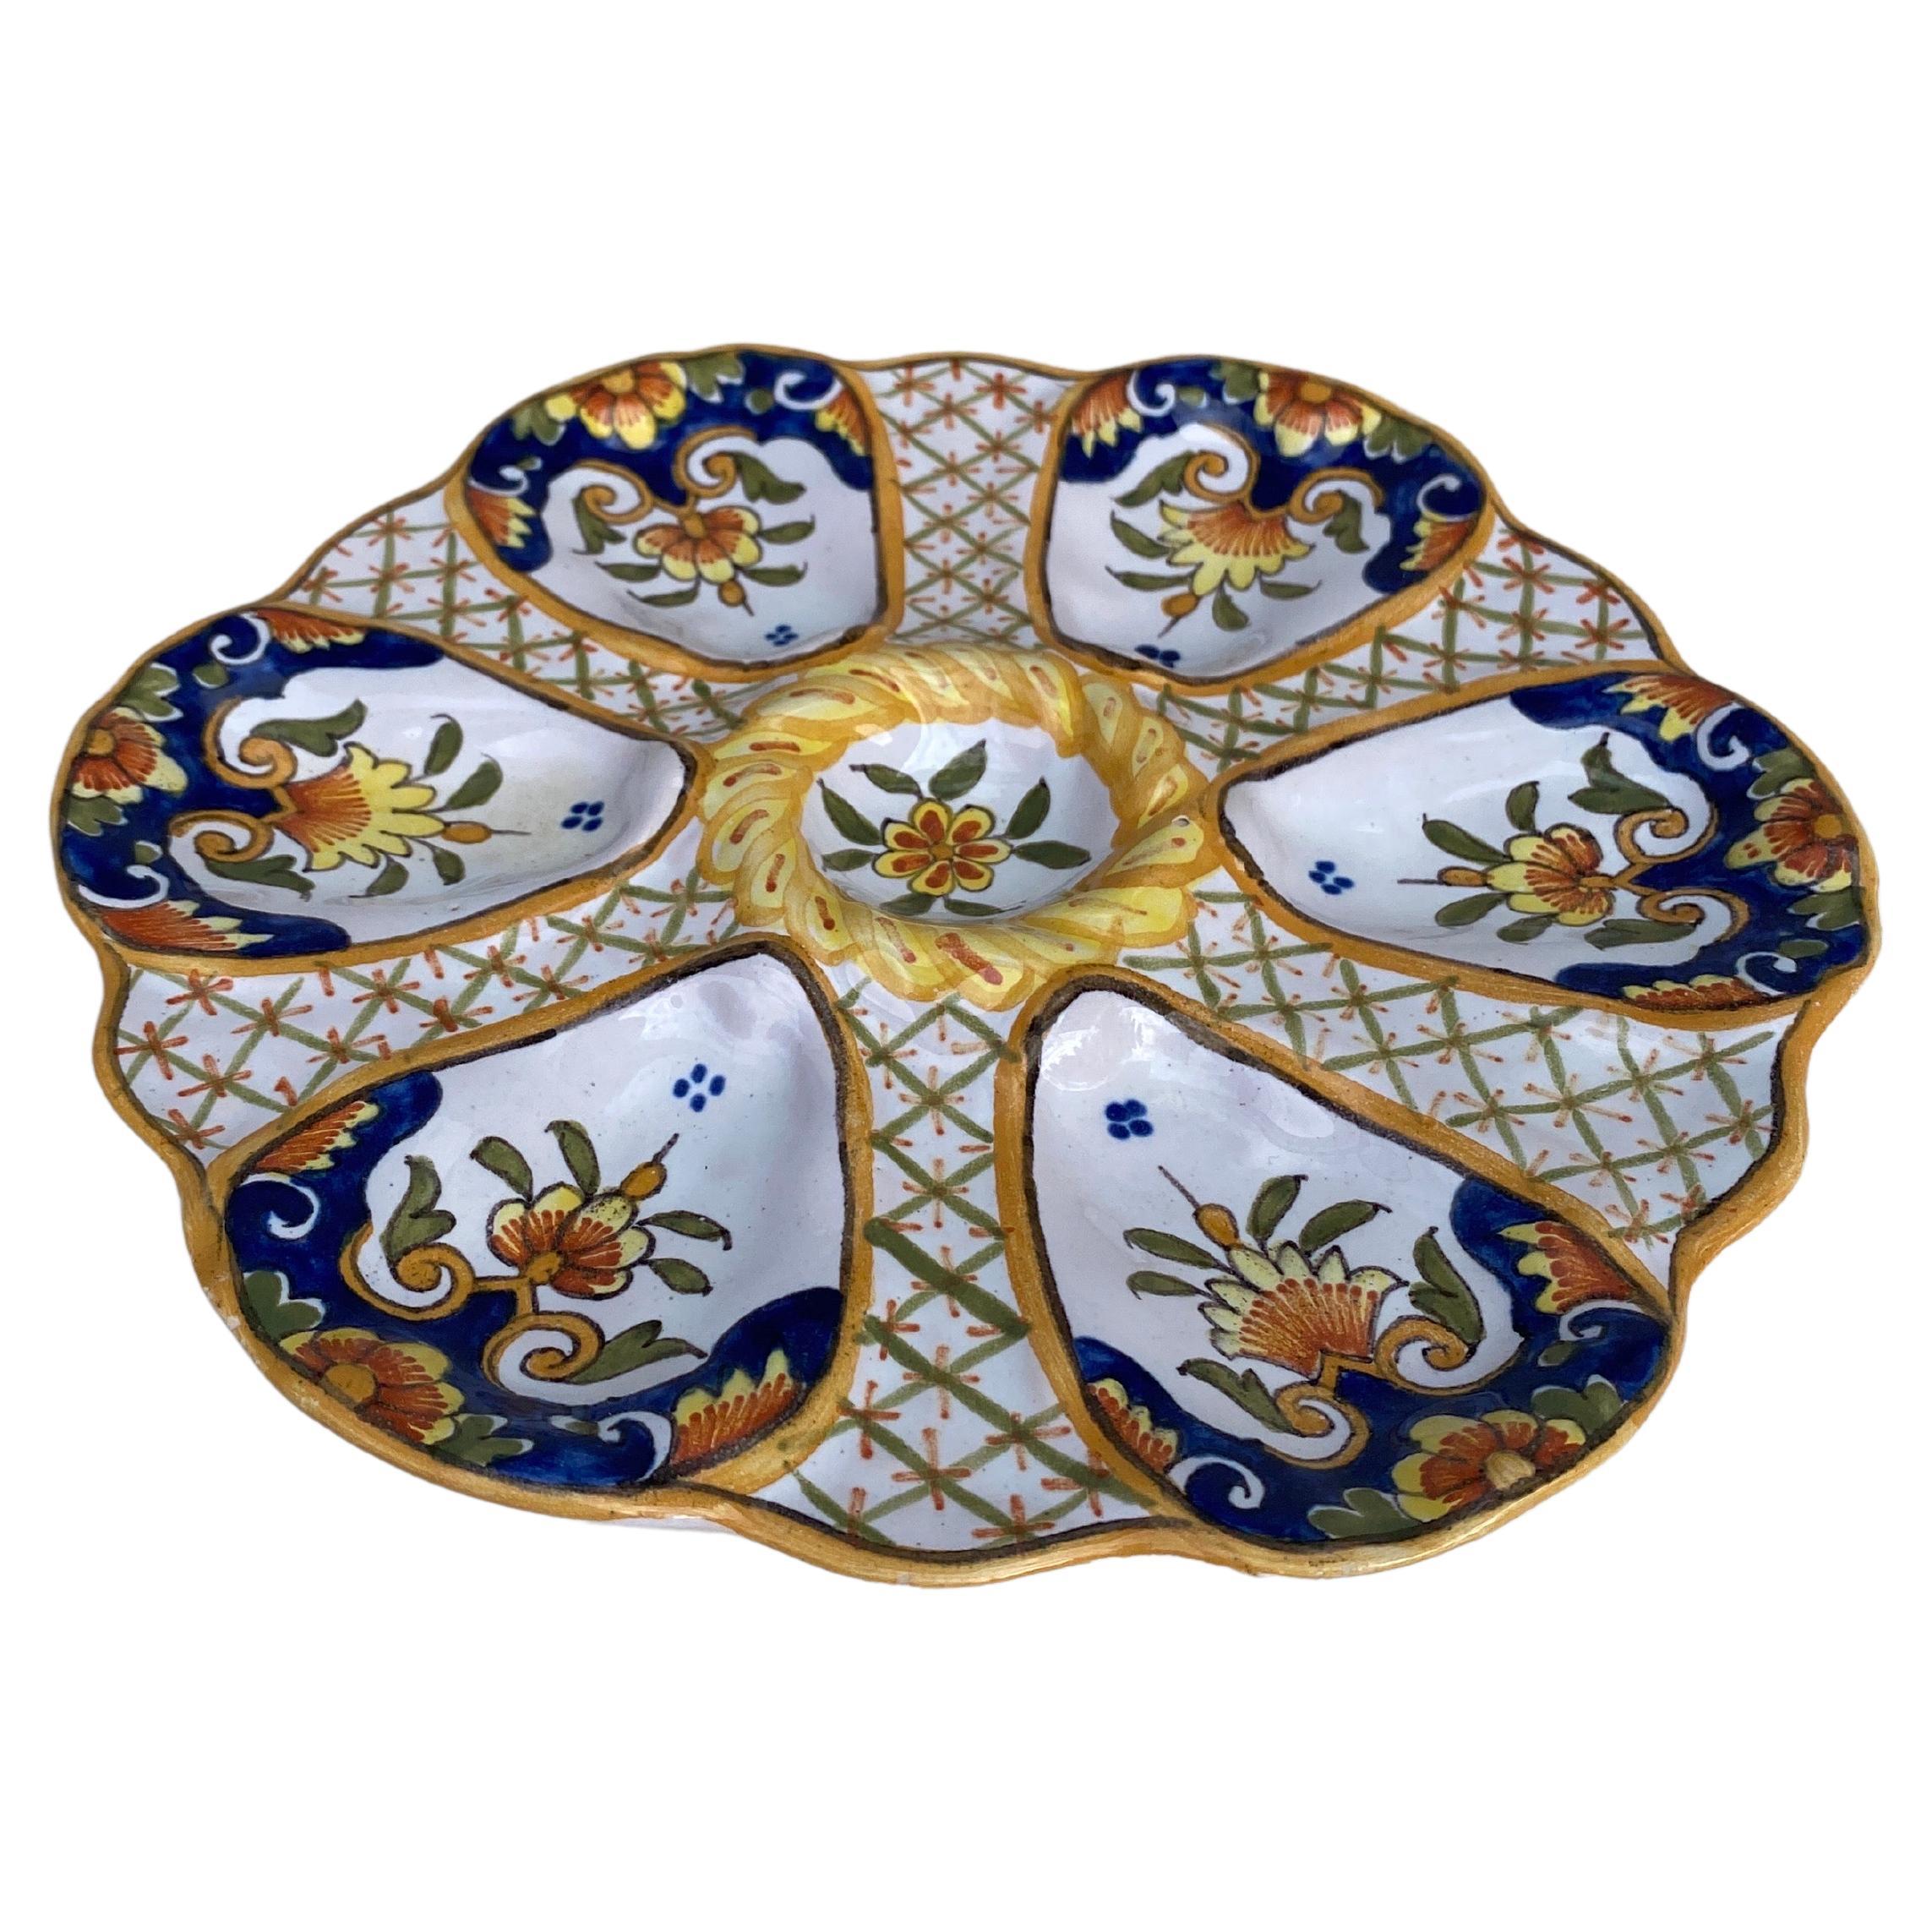 19th Century French Faience Oyster Plate.
Decorated with flowers , marked Bordeaux.